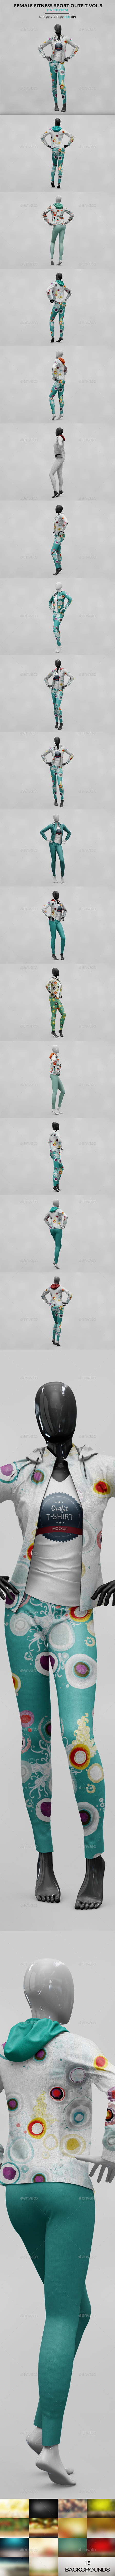 Female Sport Outfit MockUp Vol.2